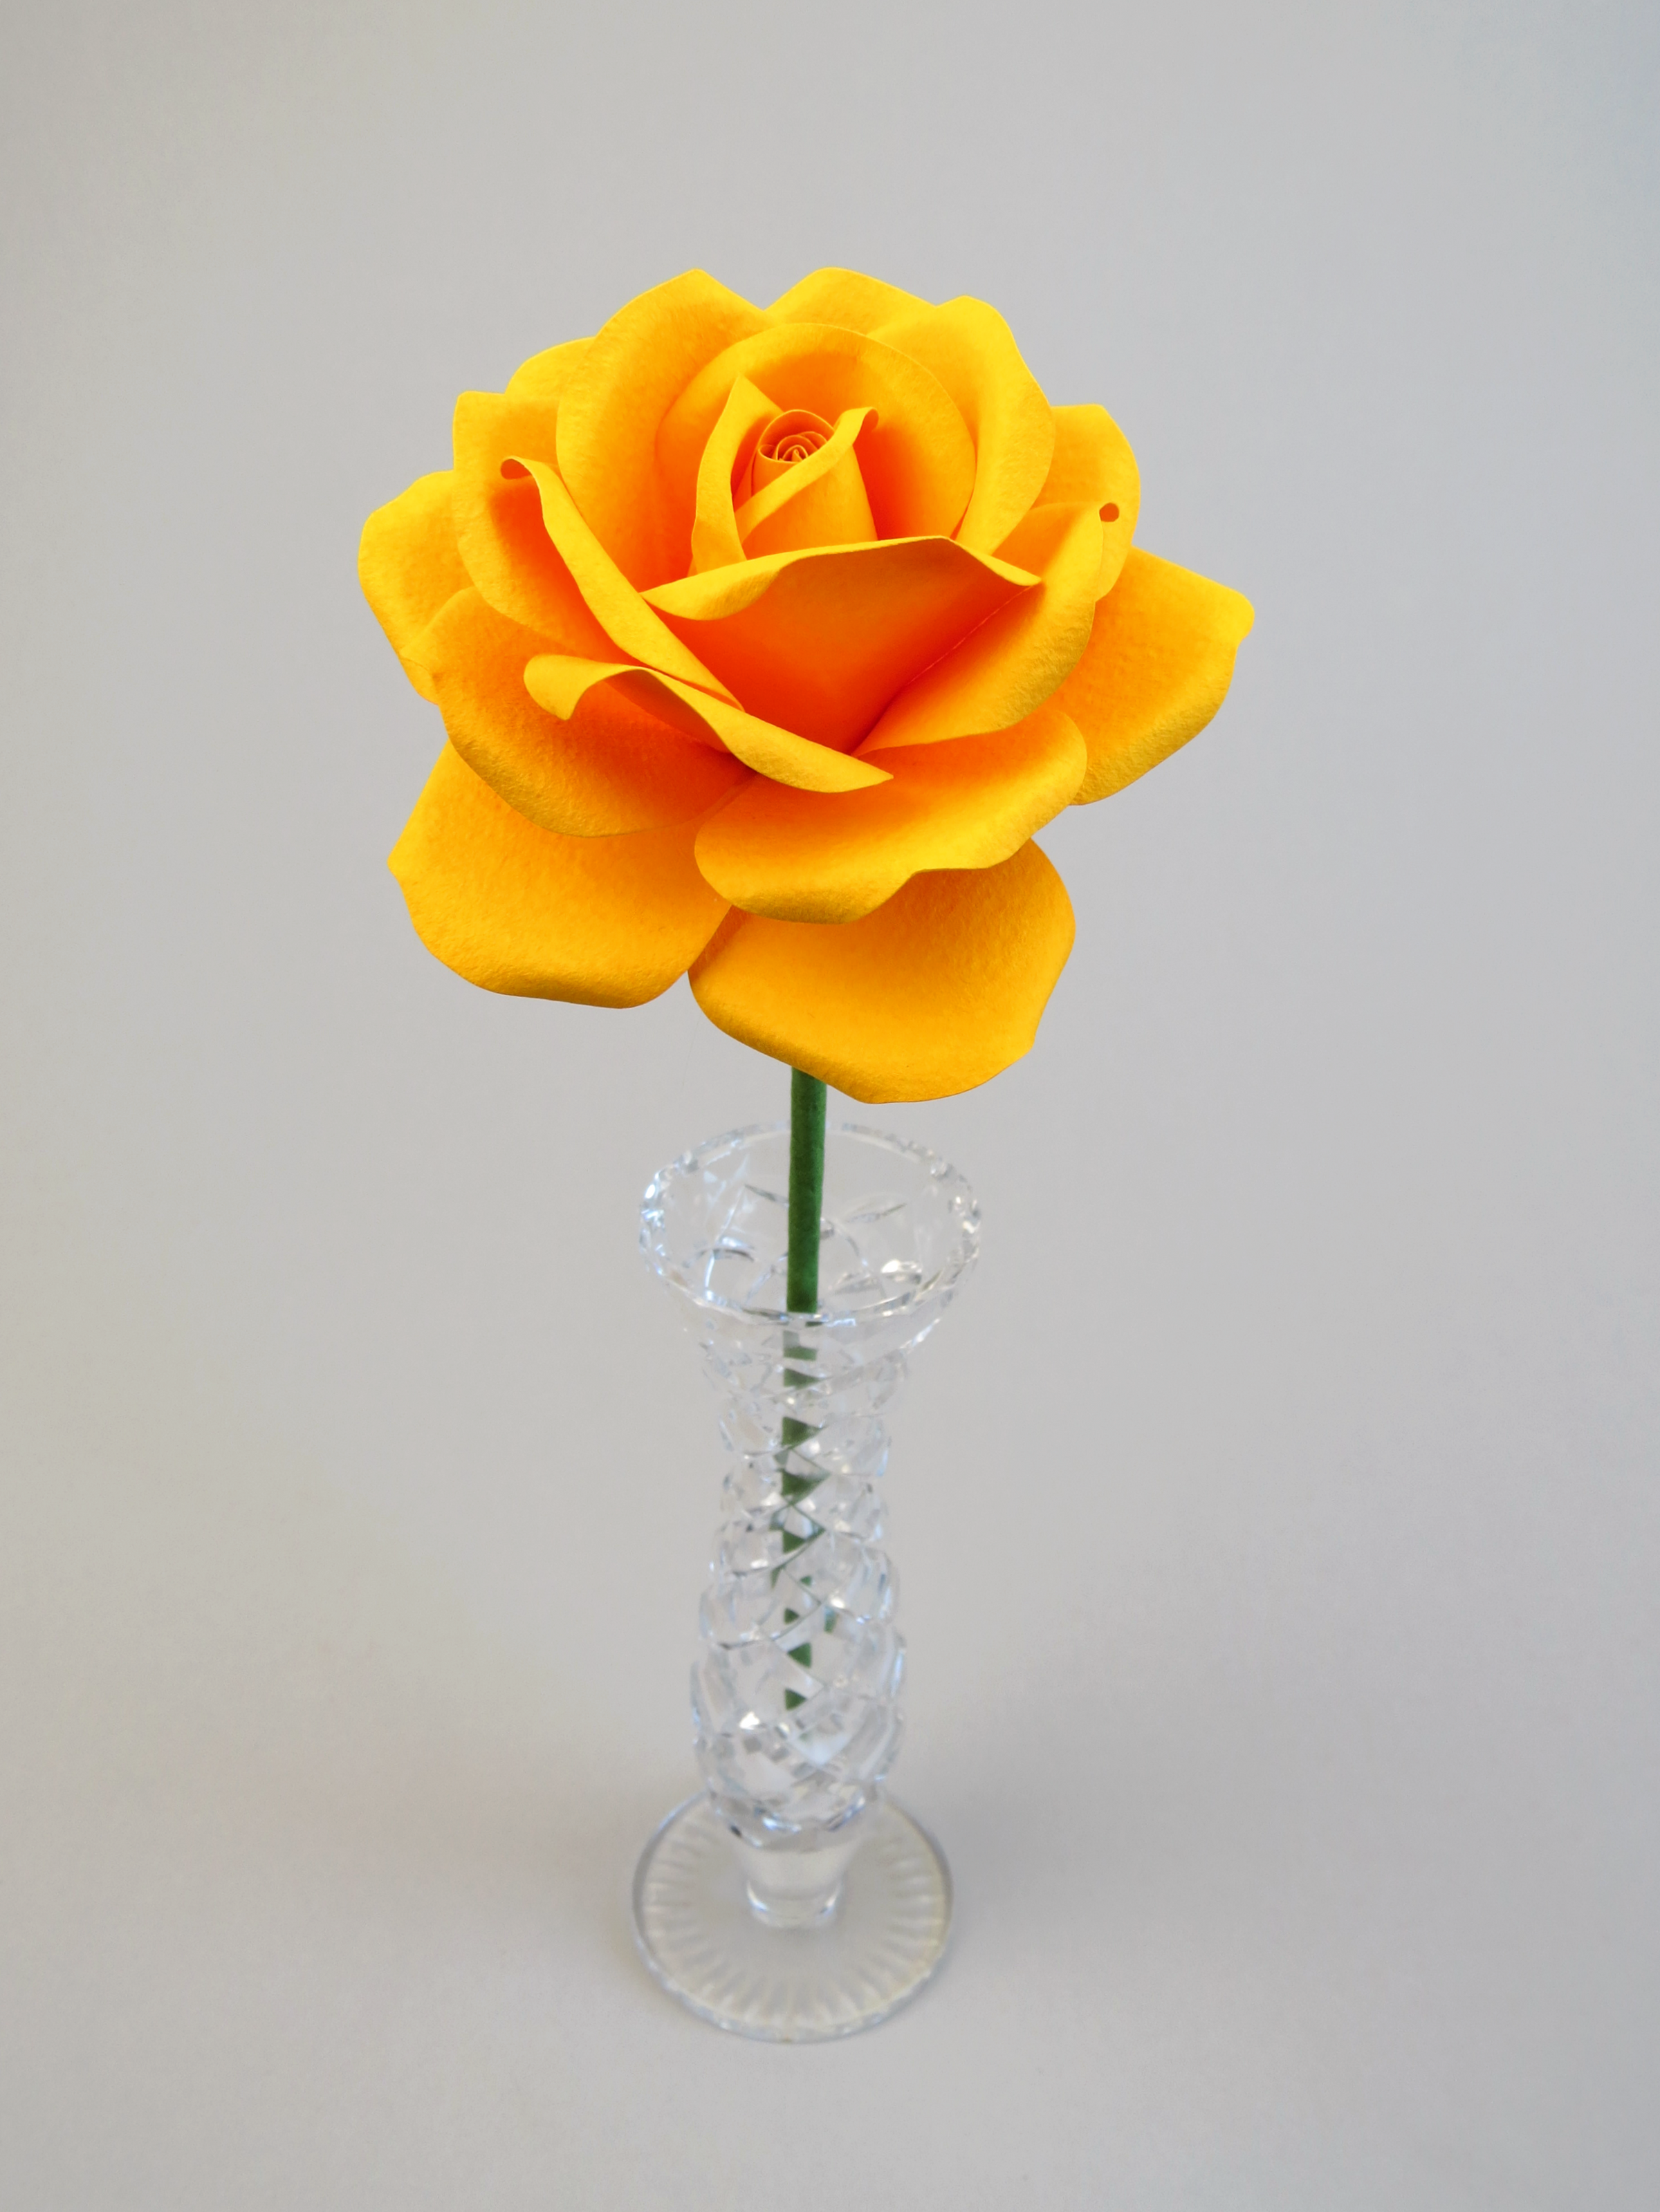 Leafless yellow cotton paper rose standing in a slender glass vase